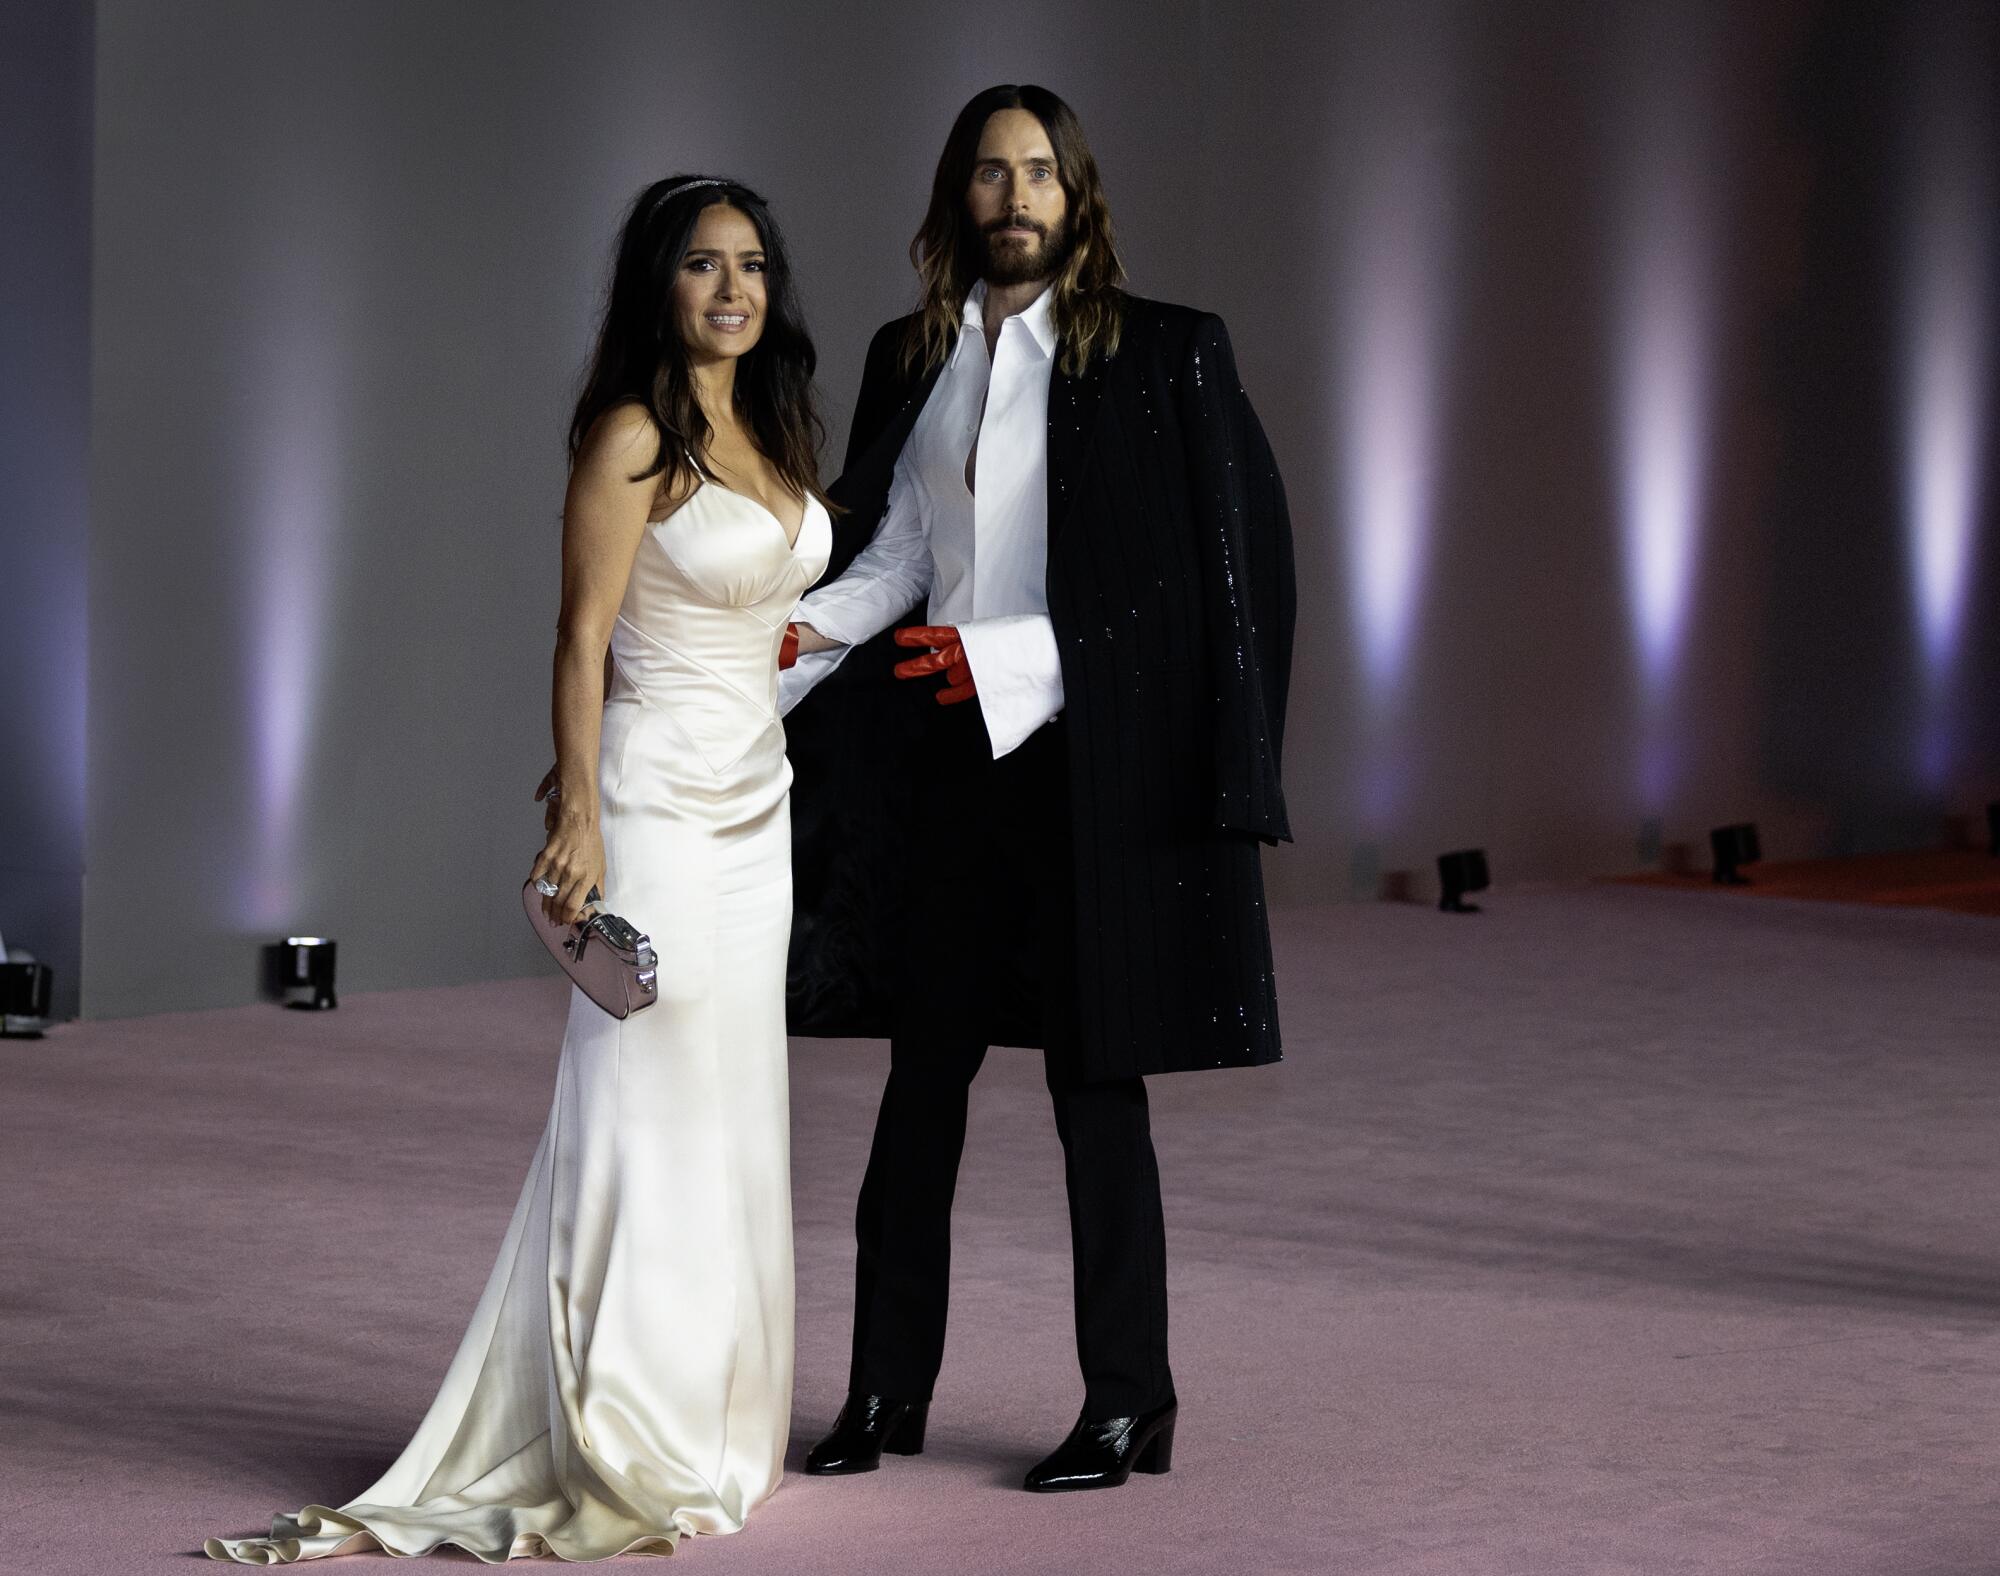 Salma Hayek and Jared Leto attend the 3rd Annual Academy Museum Gala at Academy Museum of Motion Pictures 